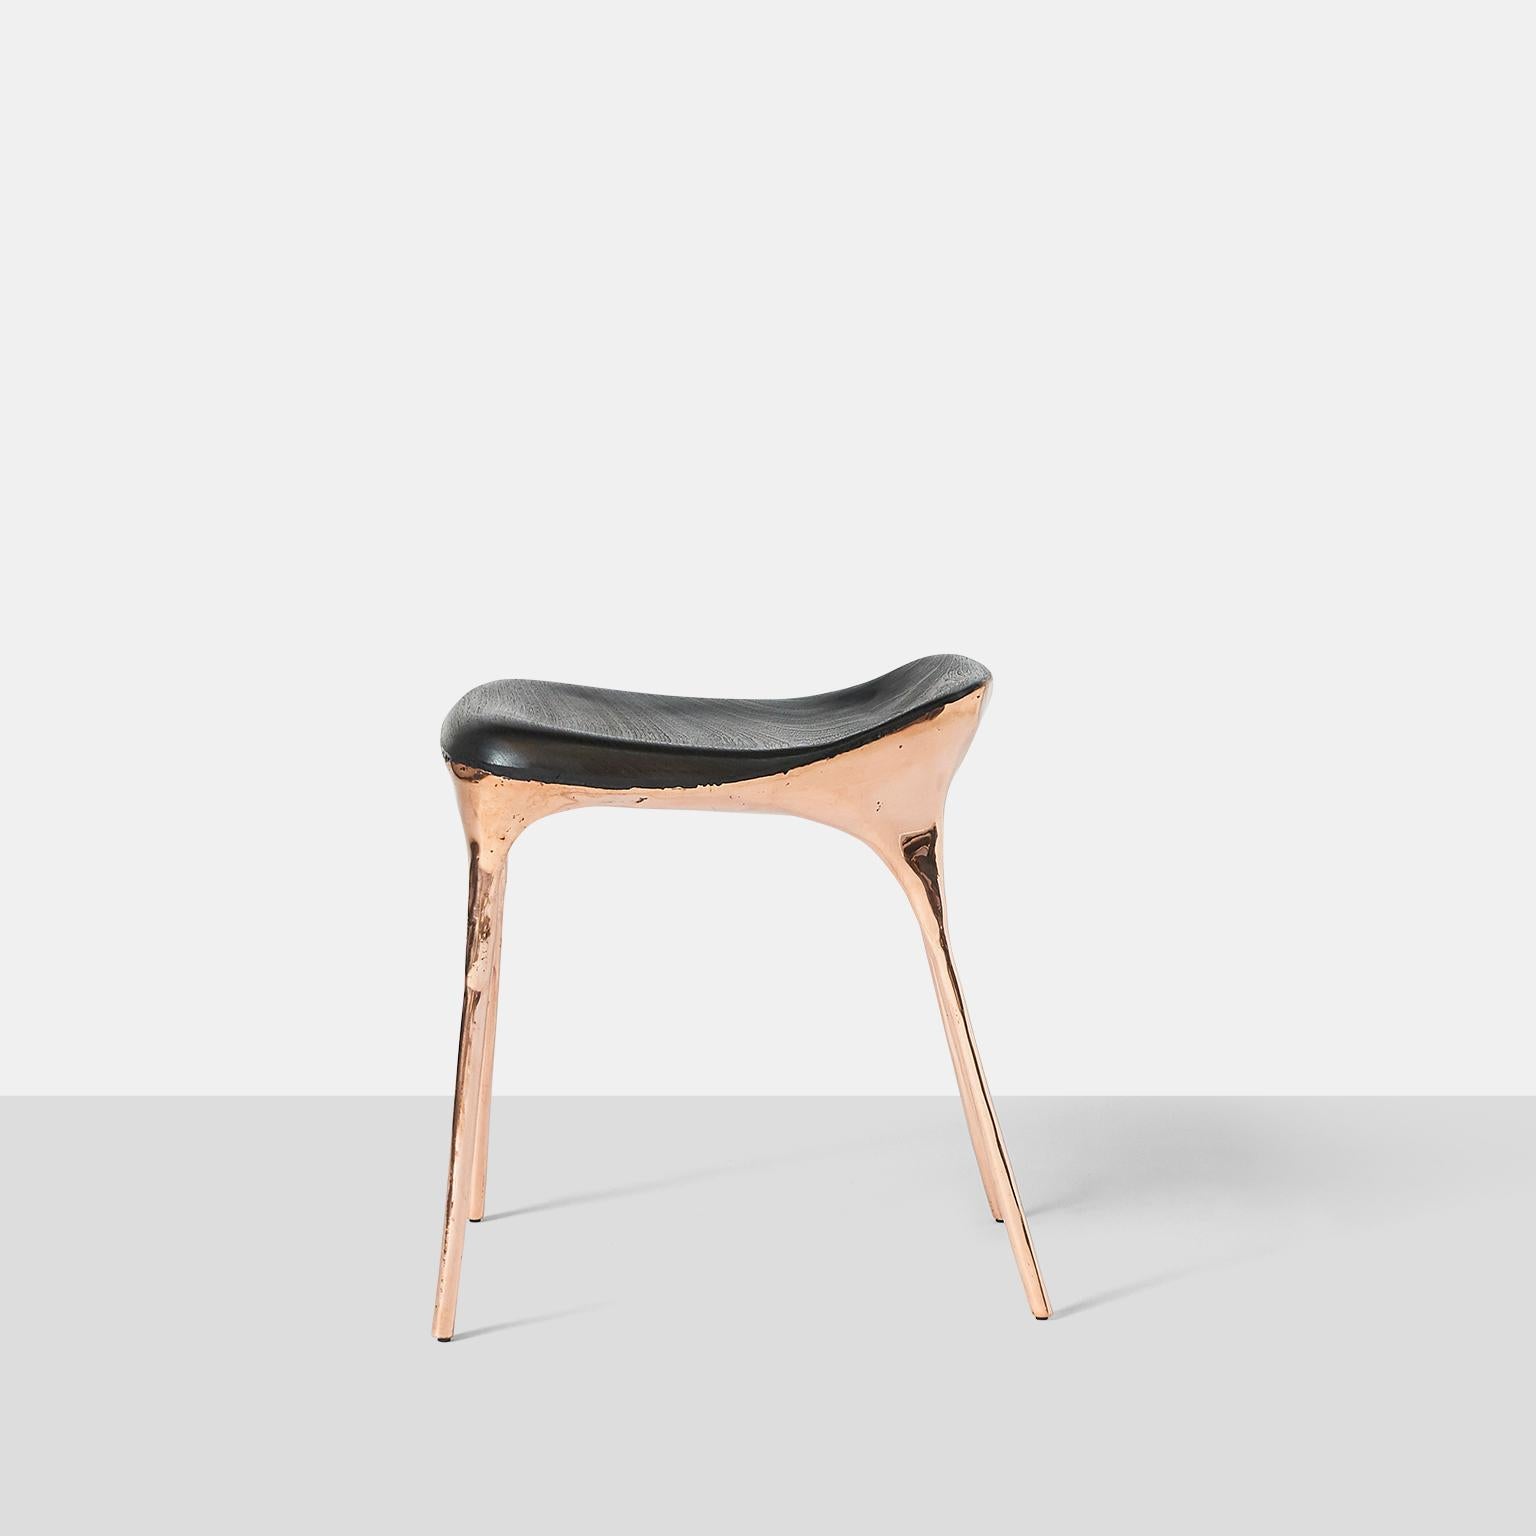 Copper stool with back by Valentin Loellmann
A stool with a scooped back edge in solid copper with blackened oak seat.